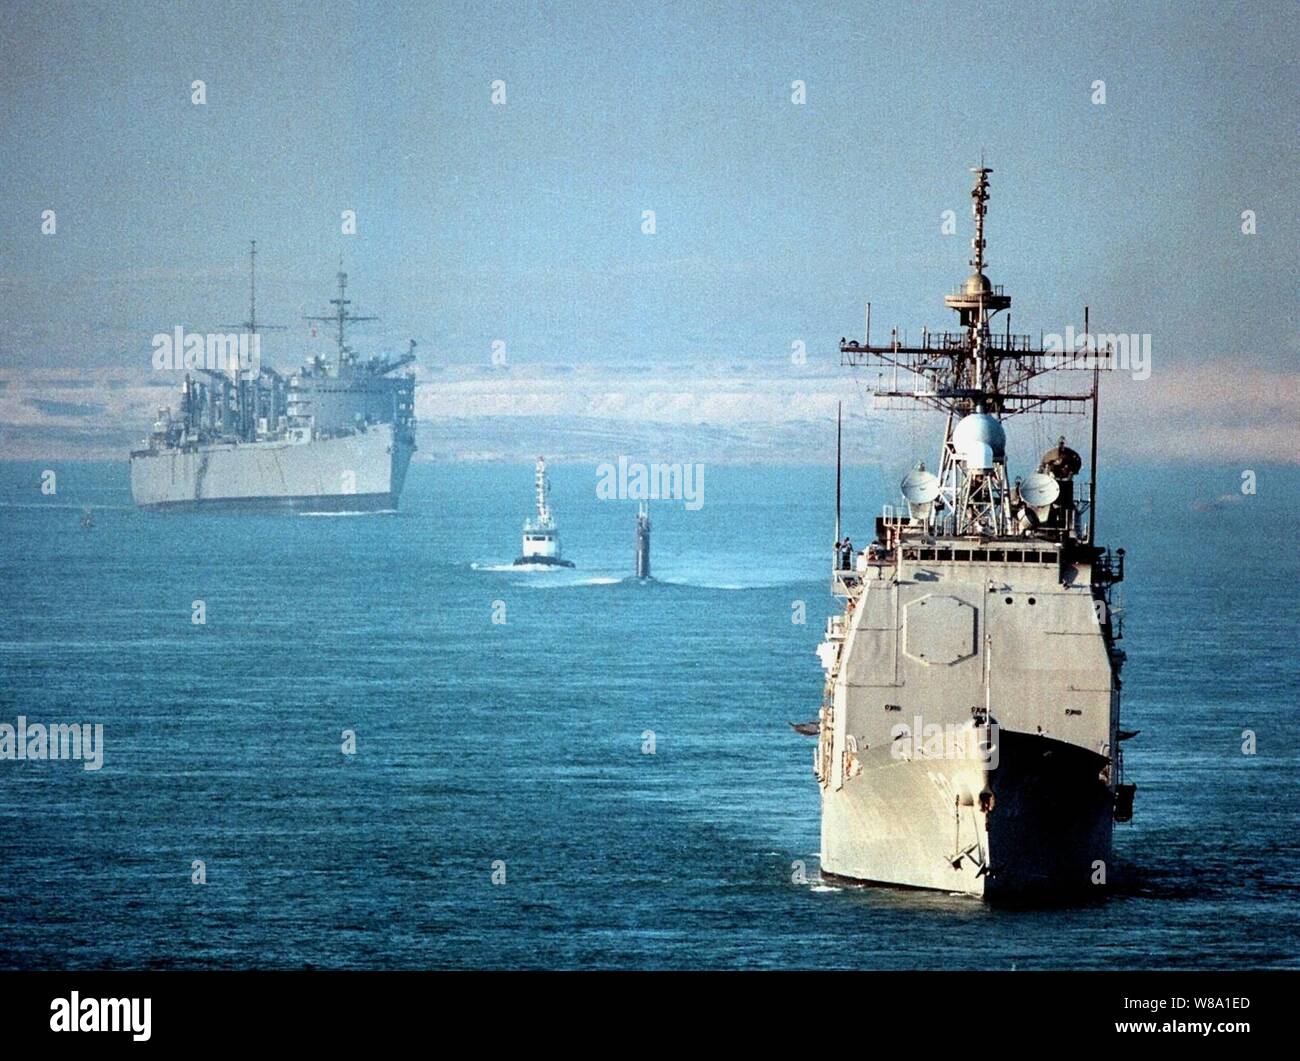 The USS Normandy (CG 60) (right), the fast attack submarine USS Annapolis (SSN 760) (center), and the fast combat support ship USS Seattle (AOE 3) (left) transit the Suez Canal on Nov. 16, 1997, as they head from the Mediterranean Sea to the Persian Gulf.  The three U.S. ships are part of the aircraft carrier USS George Washington (CVN 73) battle group which has been ordered to the Persian Gulf to join the aircraft carrier USS Nimitz (CVN 68) battle group already on station.  The two battle groups will be operating in the Persian Gulf in support of Operation Southern Watch which is the U.S. an Stock Photo